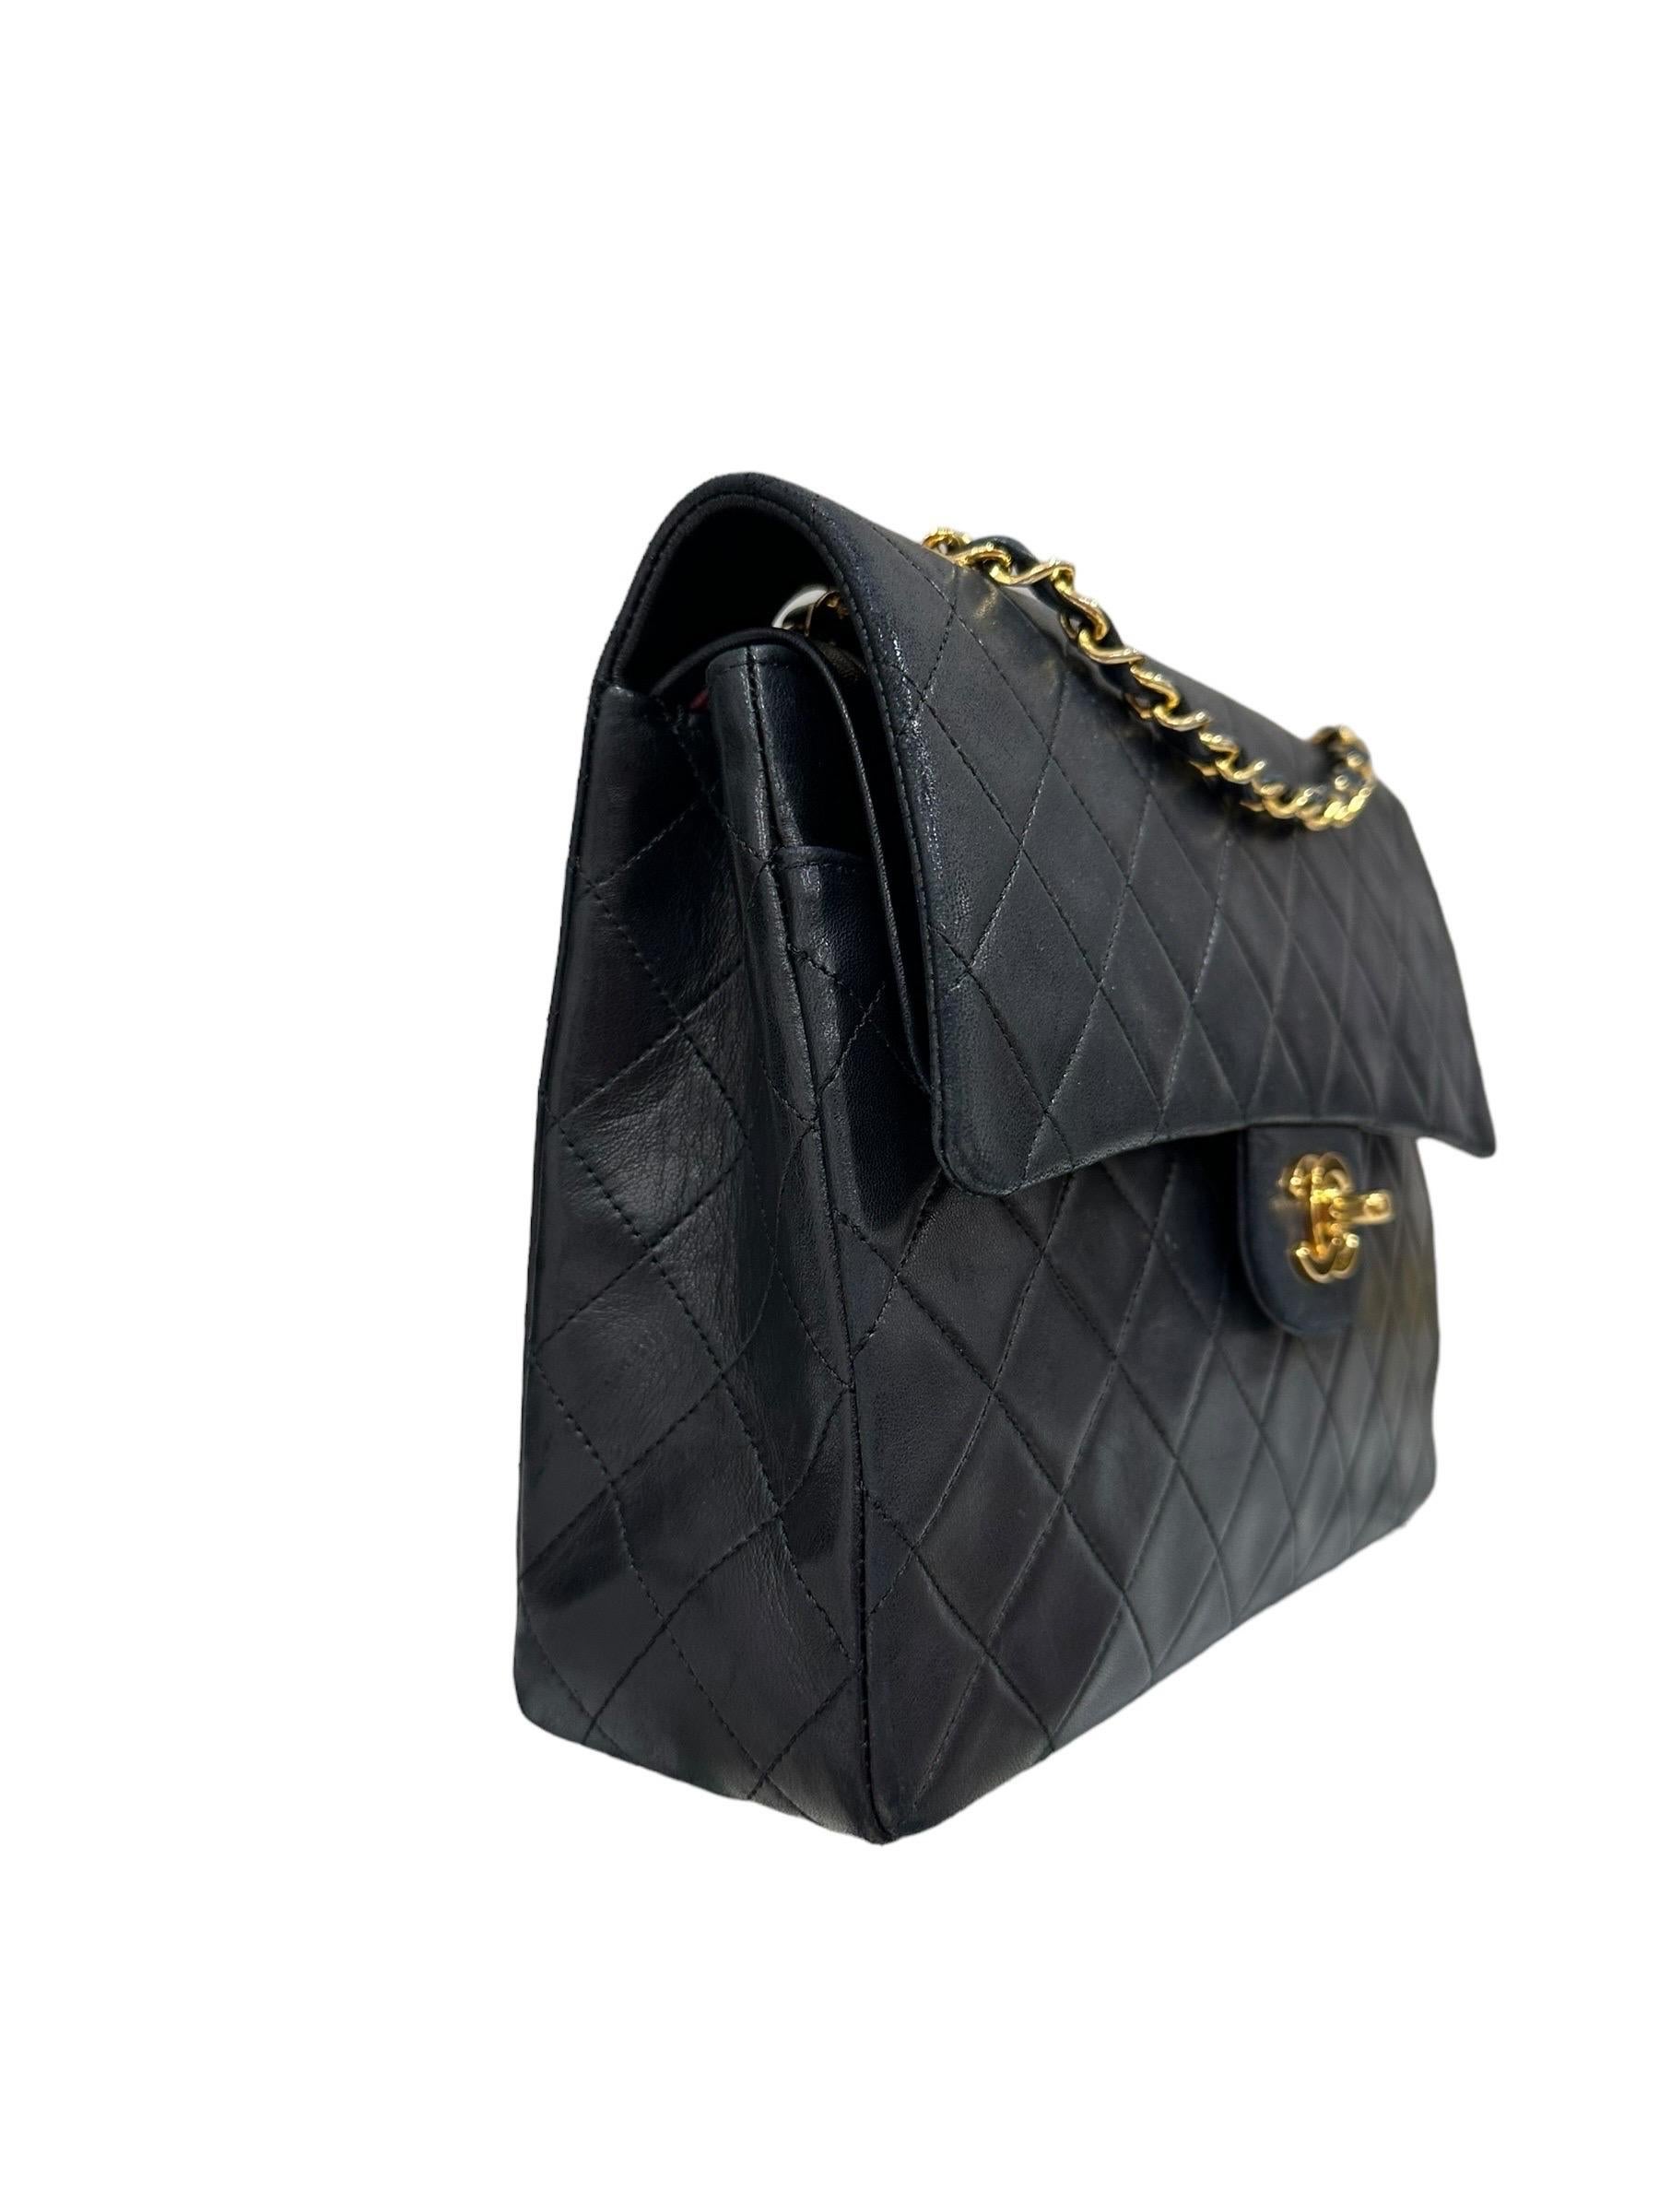 90’ Chanel Timeless 2.55 Vertical Borsa a Tracolla Nera  For Sale 1